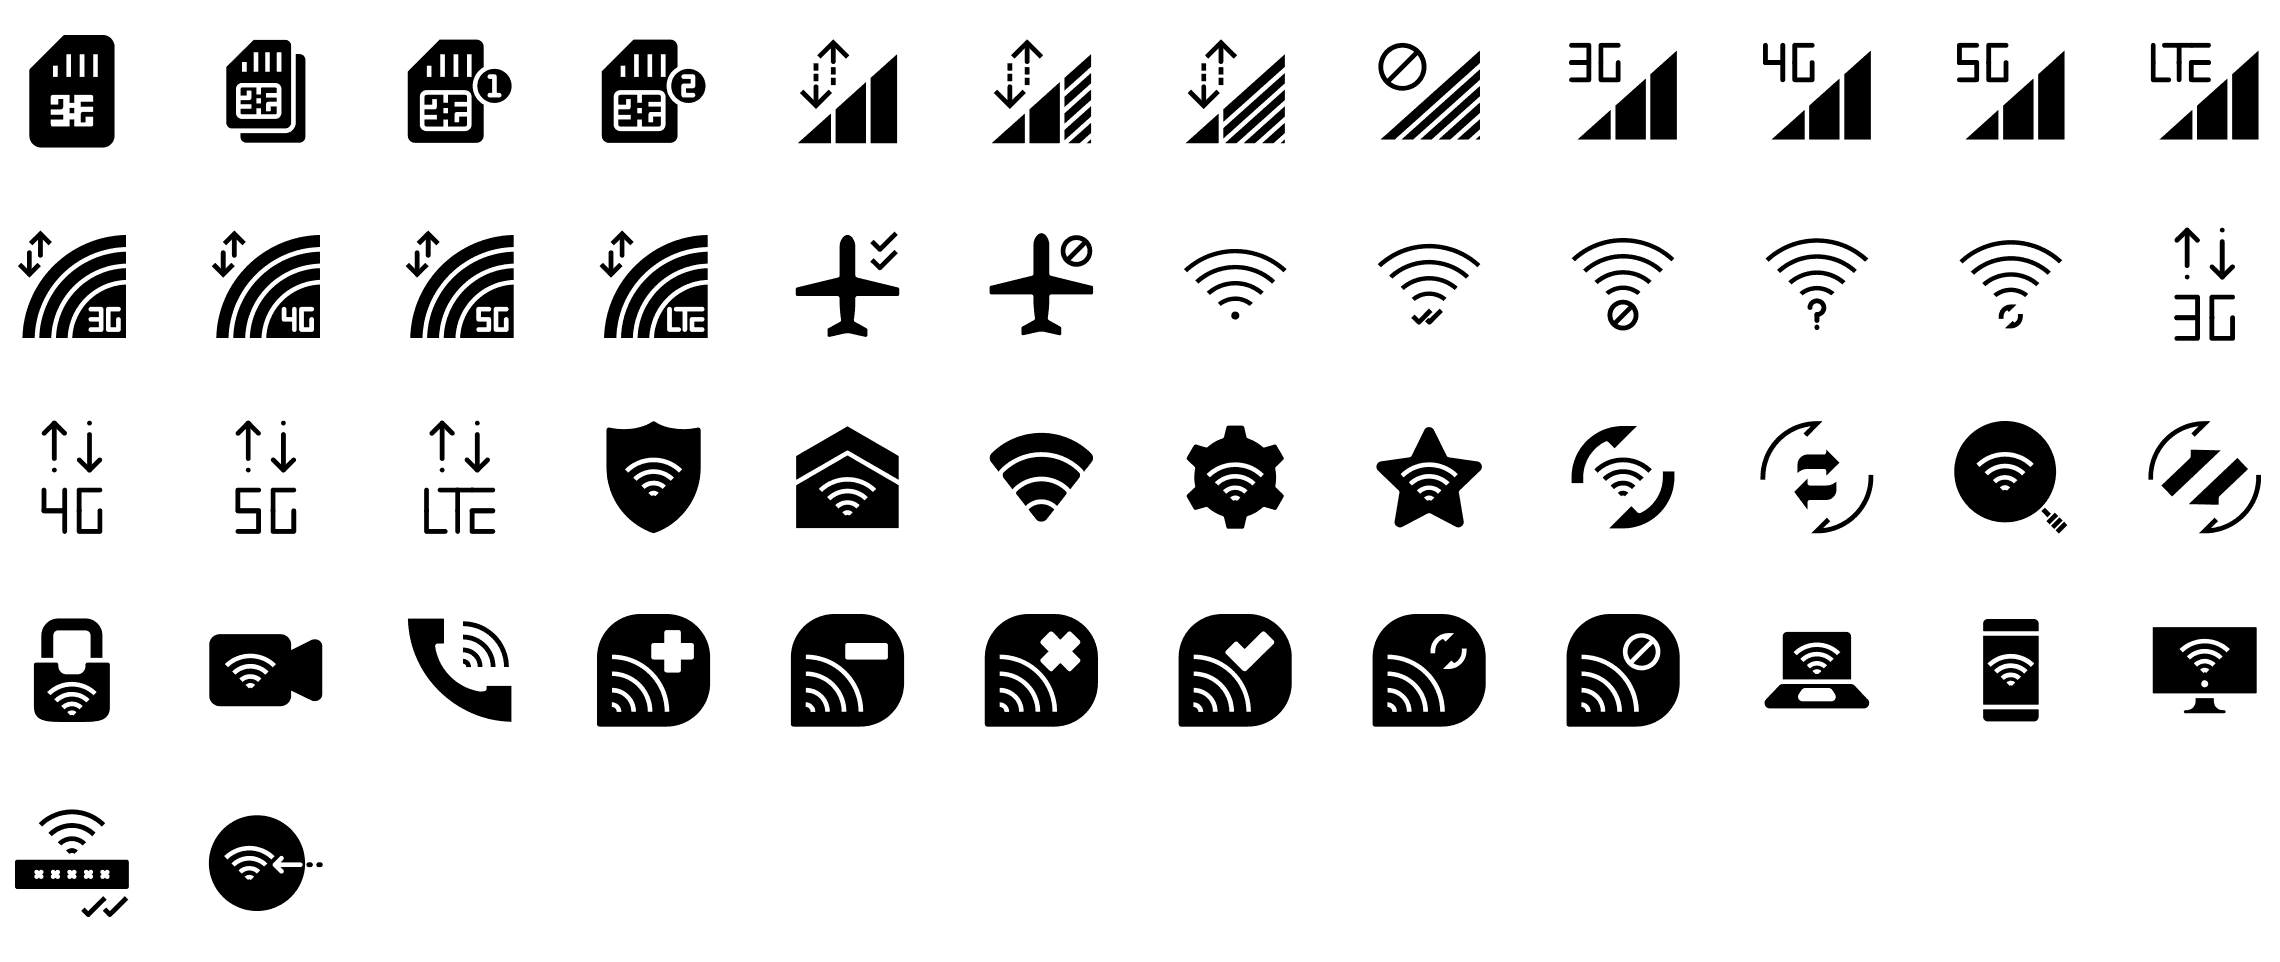 signal-indicator-glyph-icons-preview